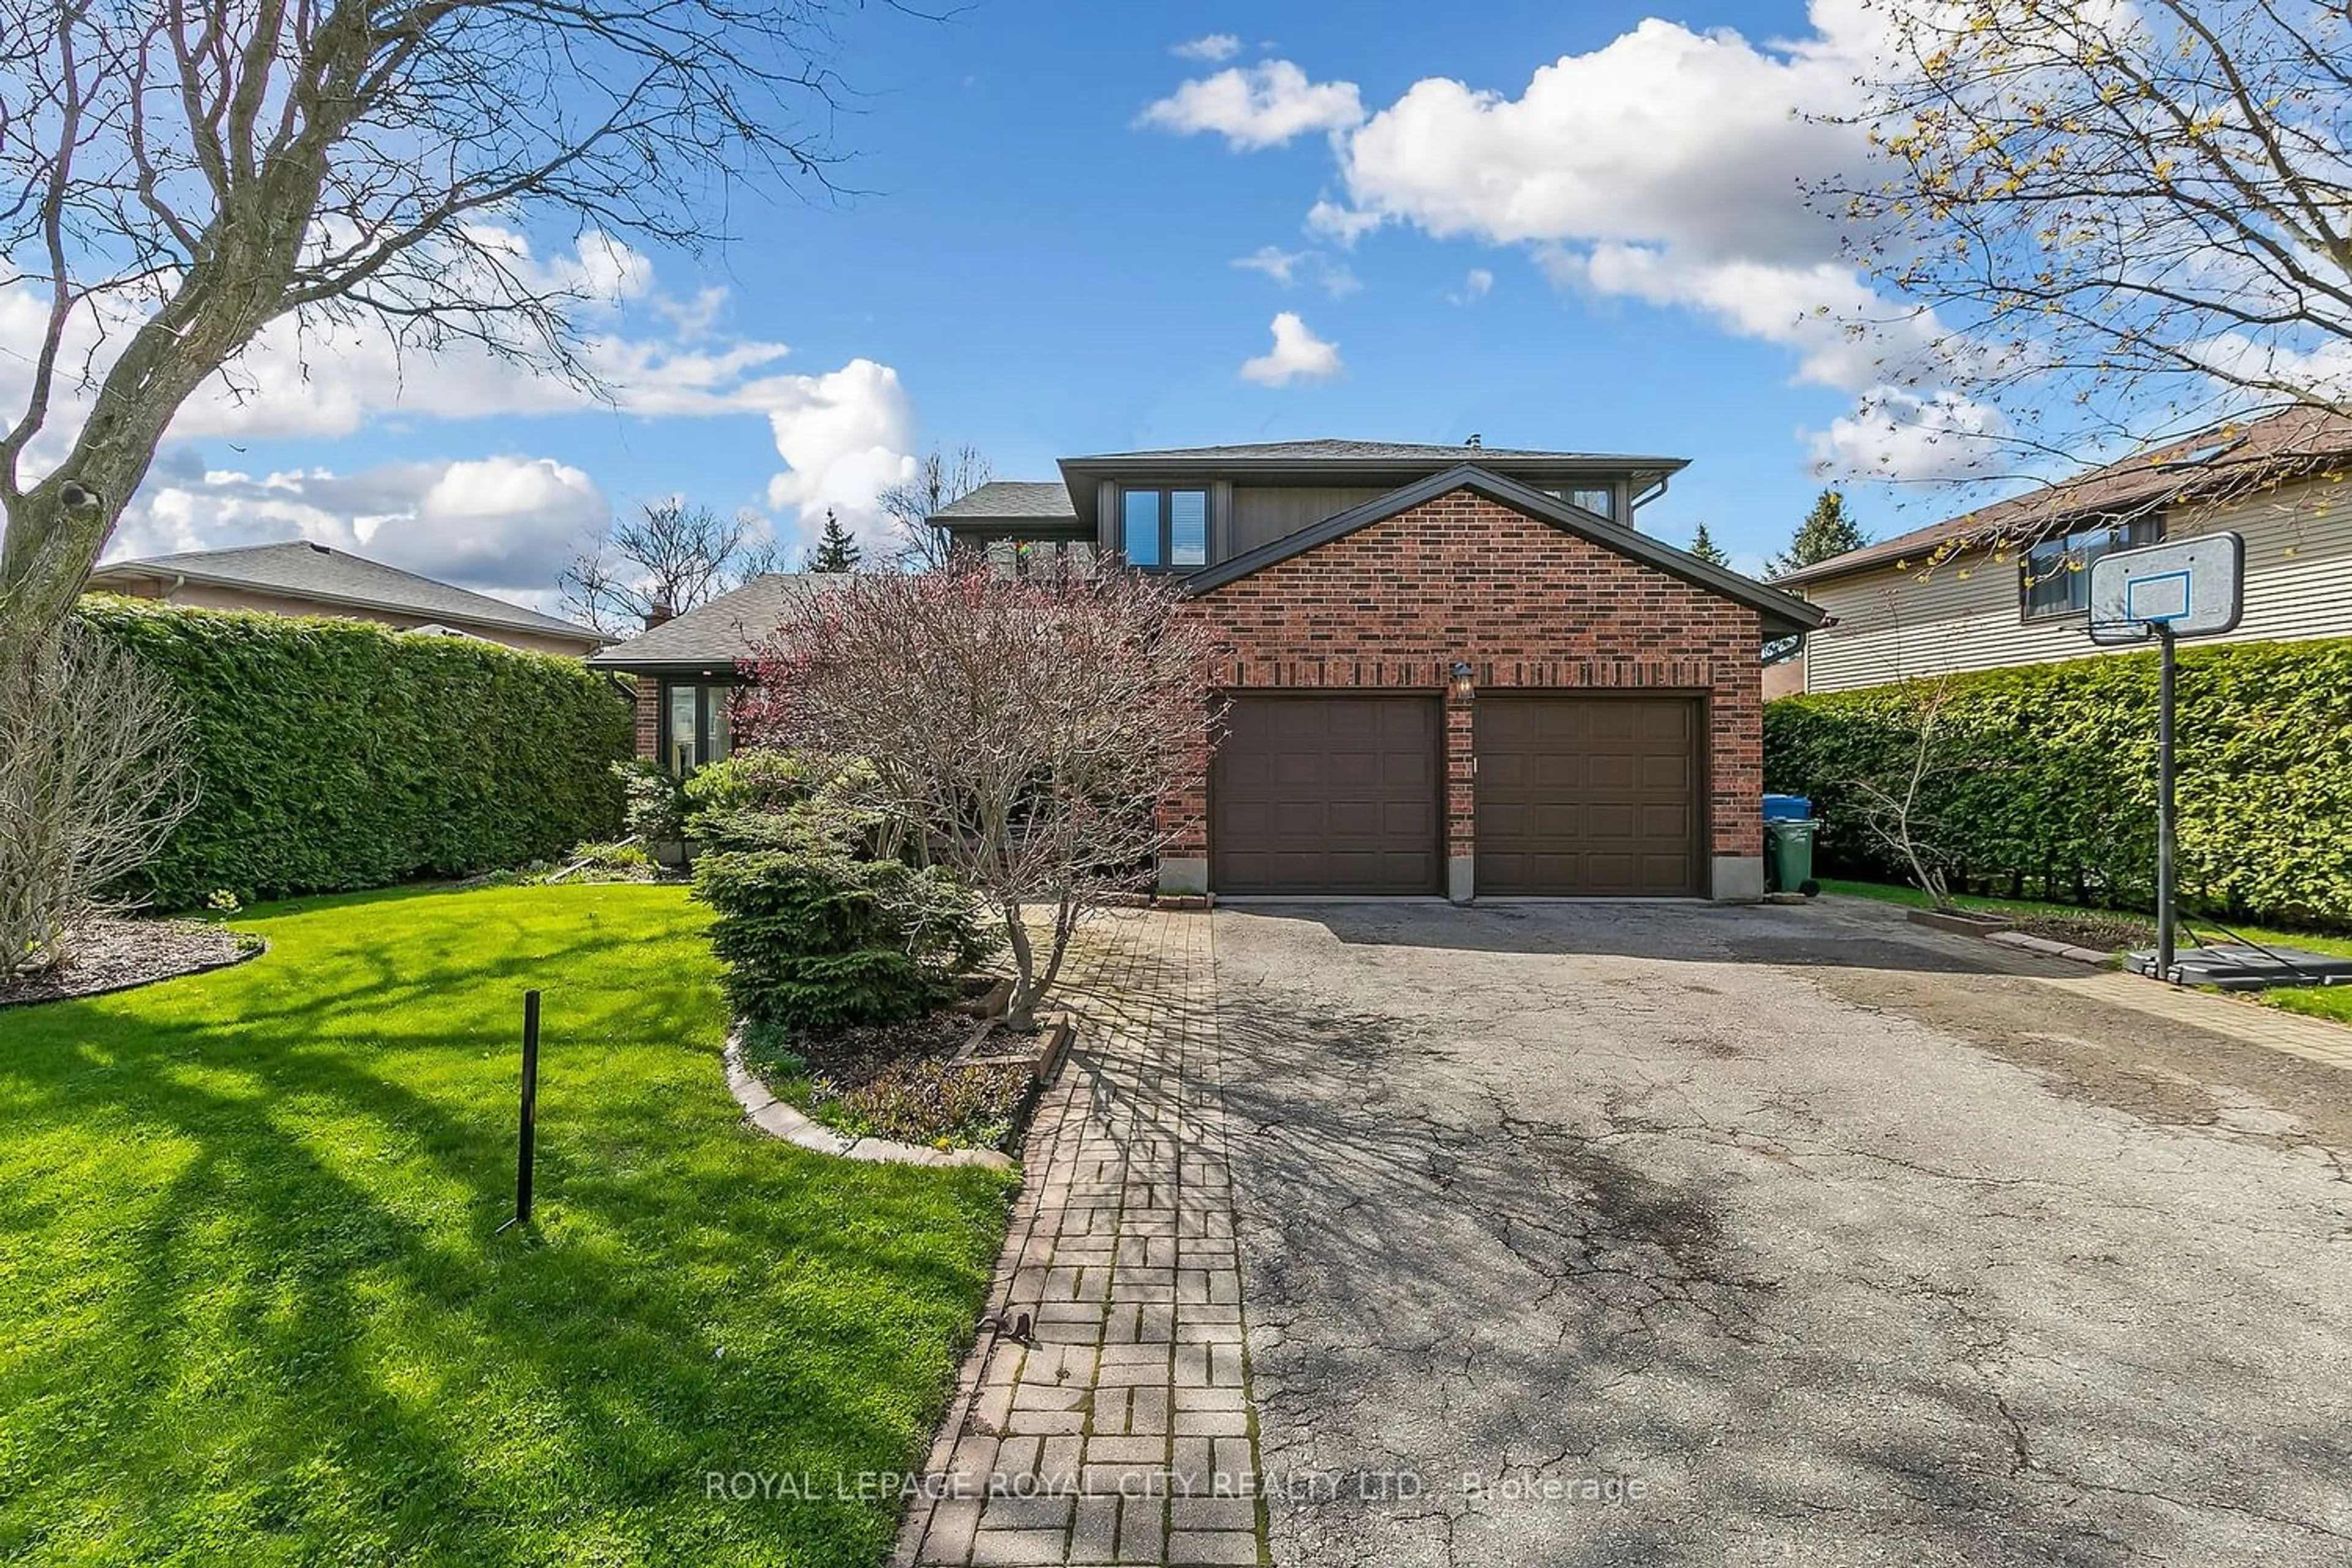 Home with brick exterior material for 40 Forster Dr, Guelph Ontario N1G 4C7